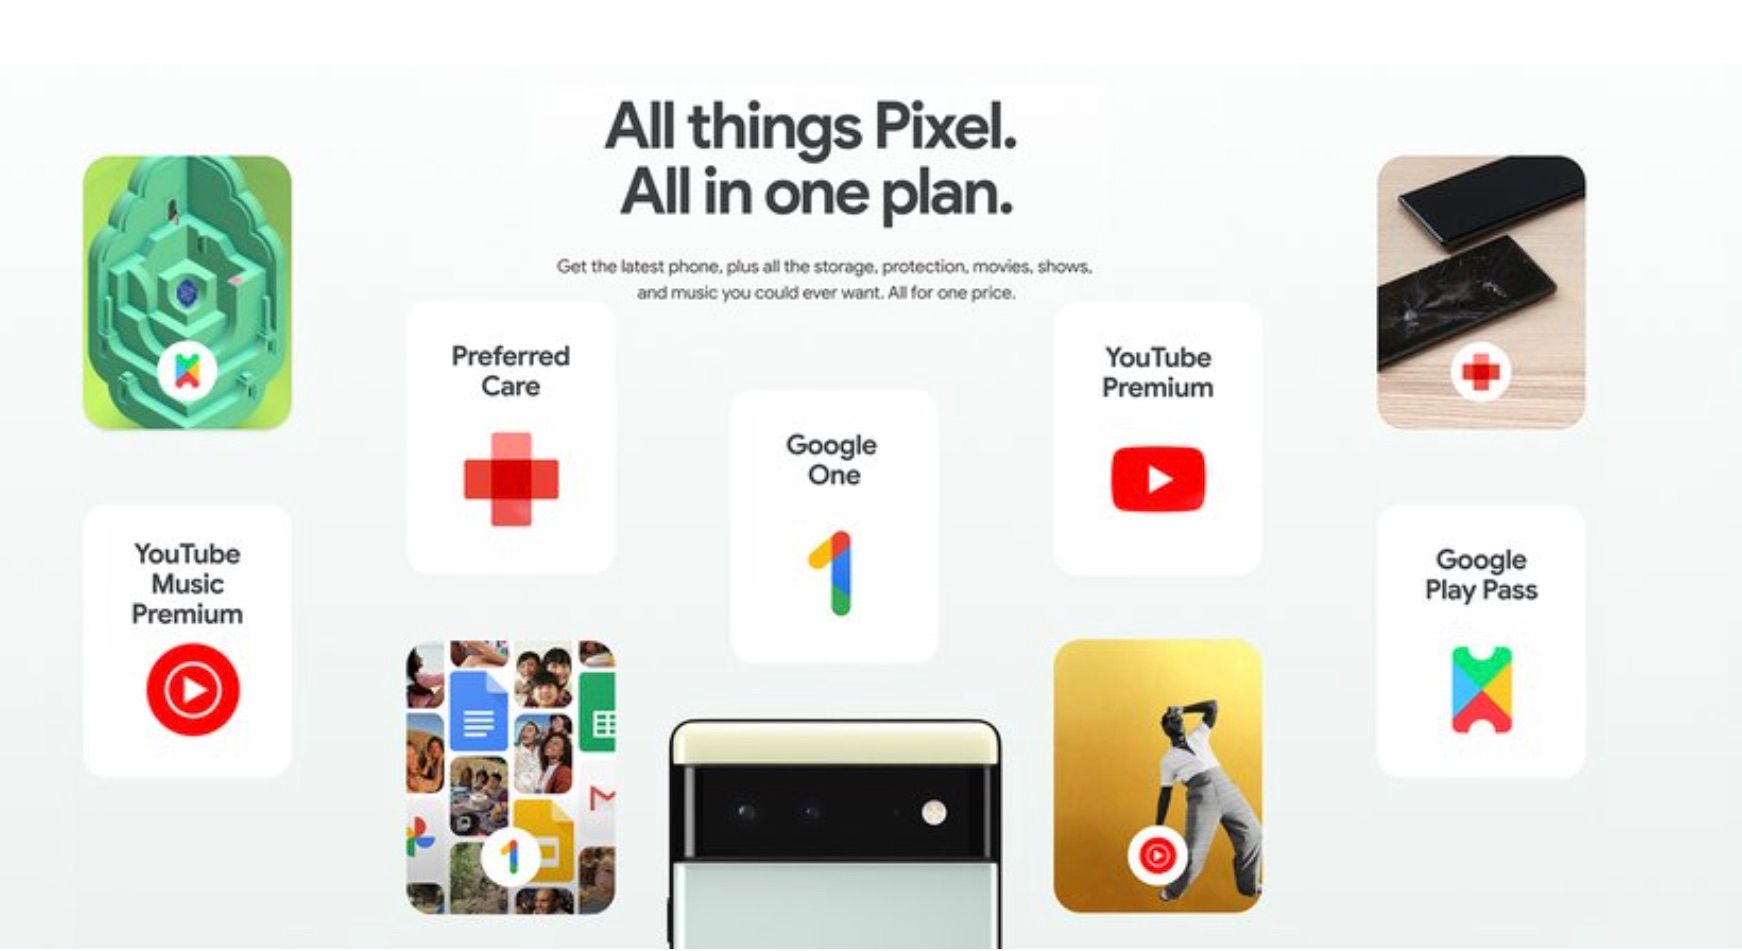 Google ad showing the various services and features of the Pixel Pass plan